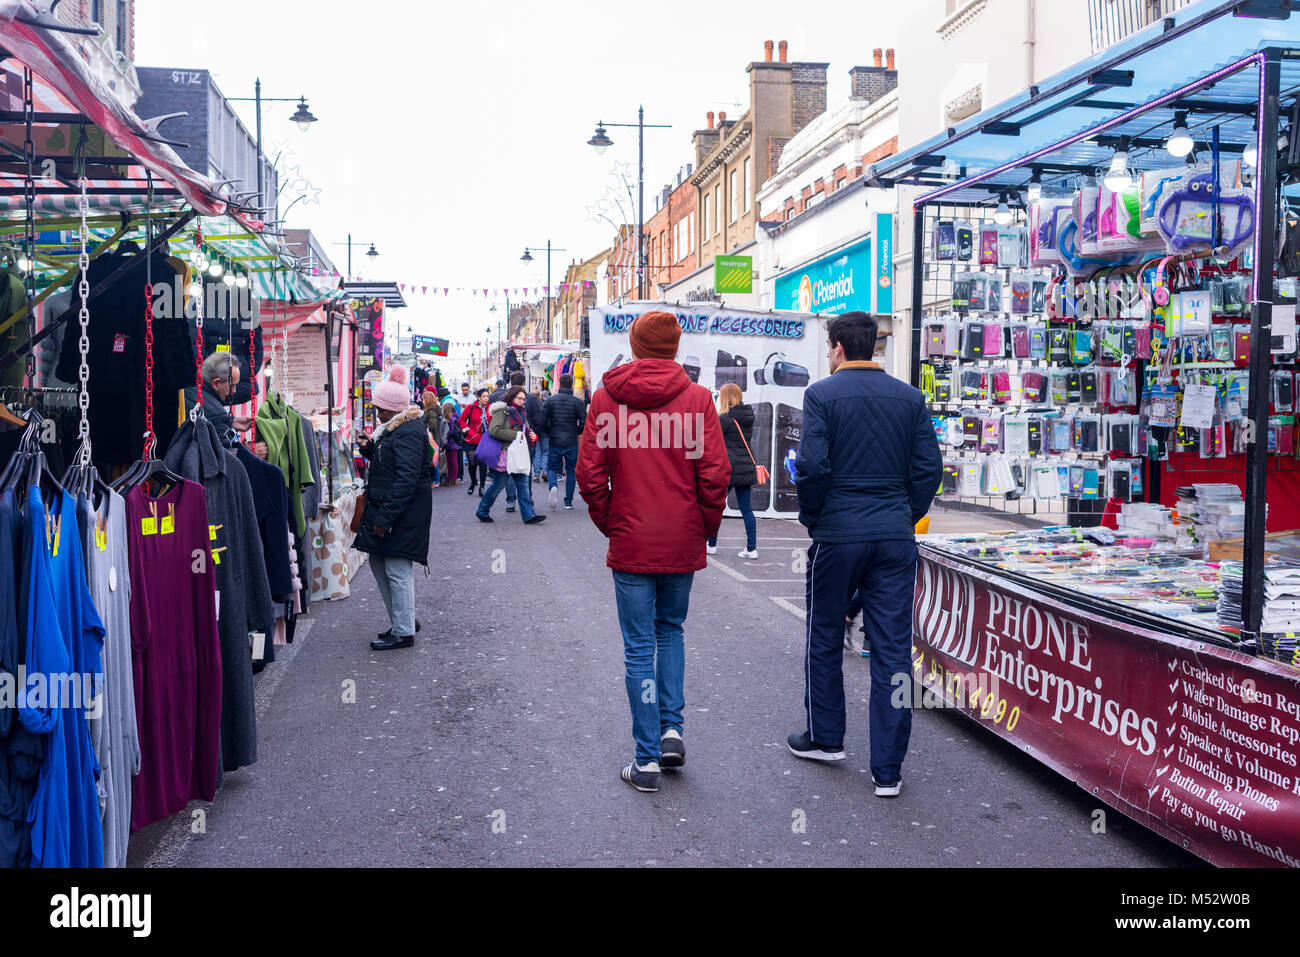 People walking and shopping around several stalls at the Chapel Market, a daily street market in Angel, Islington, North London, UK. Stock Photo